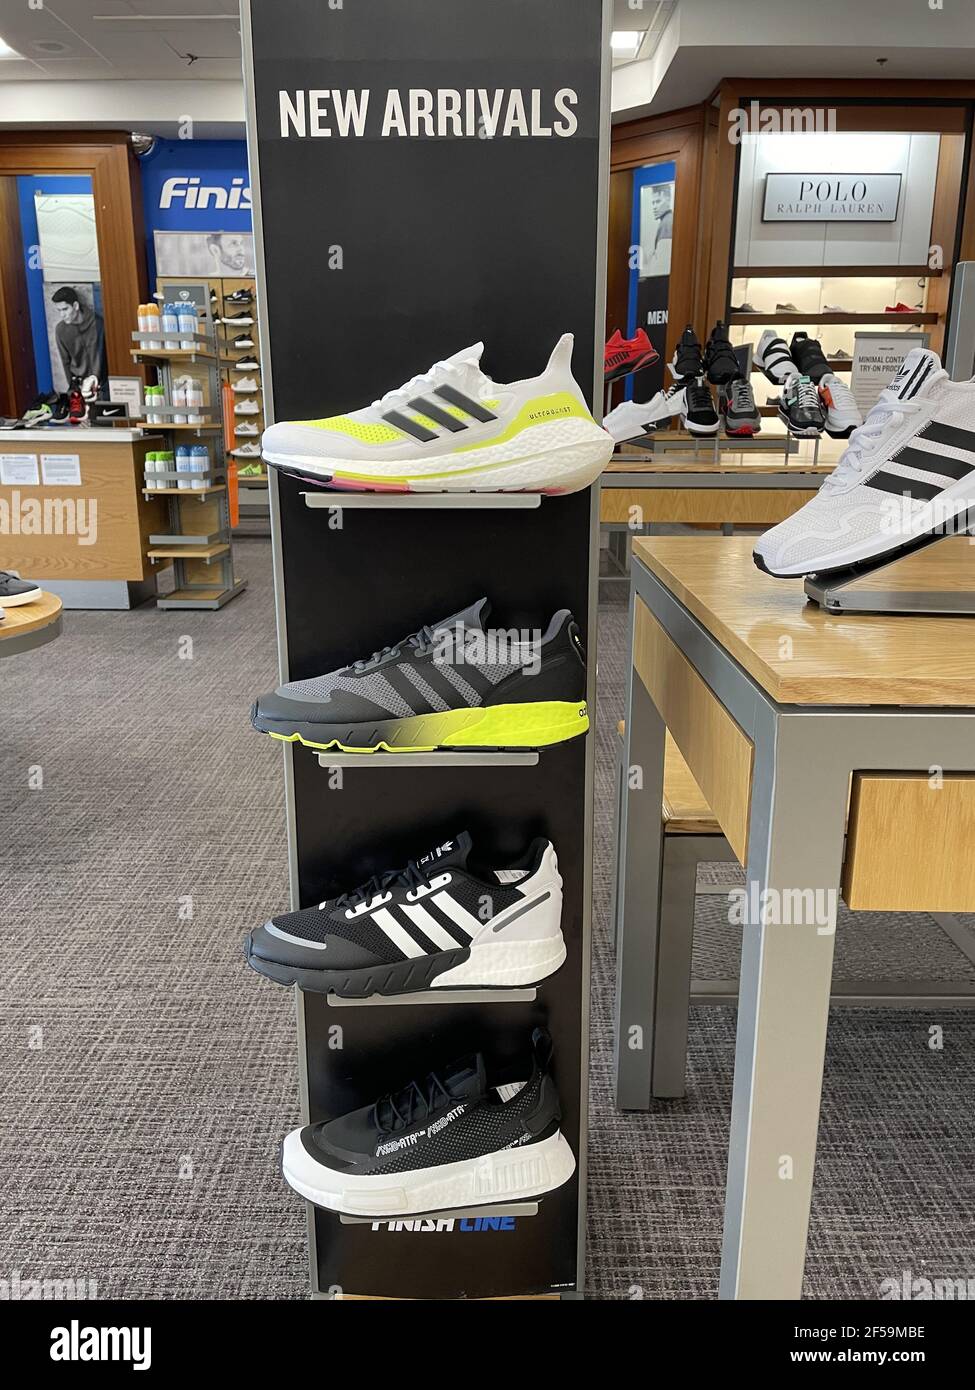 FRESNO, UNITED STATES - Mar 24, 2021: A photo of the New Arrivals of Adidas  Shoes for Men March 24, 2021 Stock Photo - Alamy